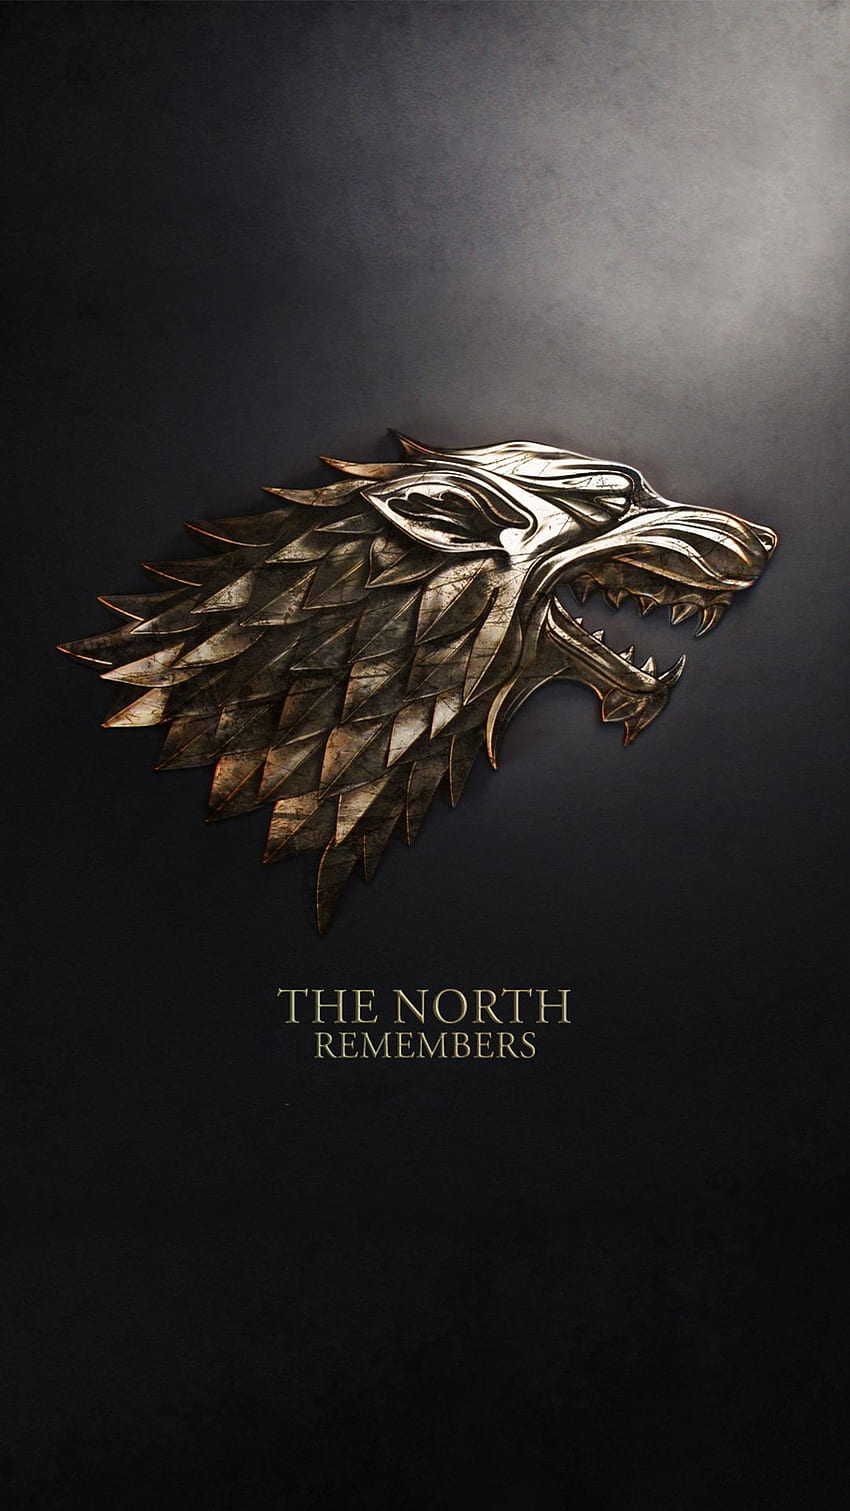 Stark Wolf family emblem coat of arms The North Remembers from Game of Thrones GoT phone iPh. Got game of thrones, Game of thrones poster, Game of thrones artwork HD phone wallpaper